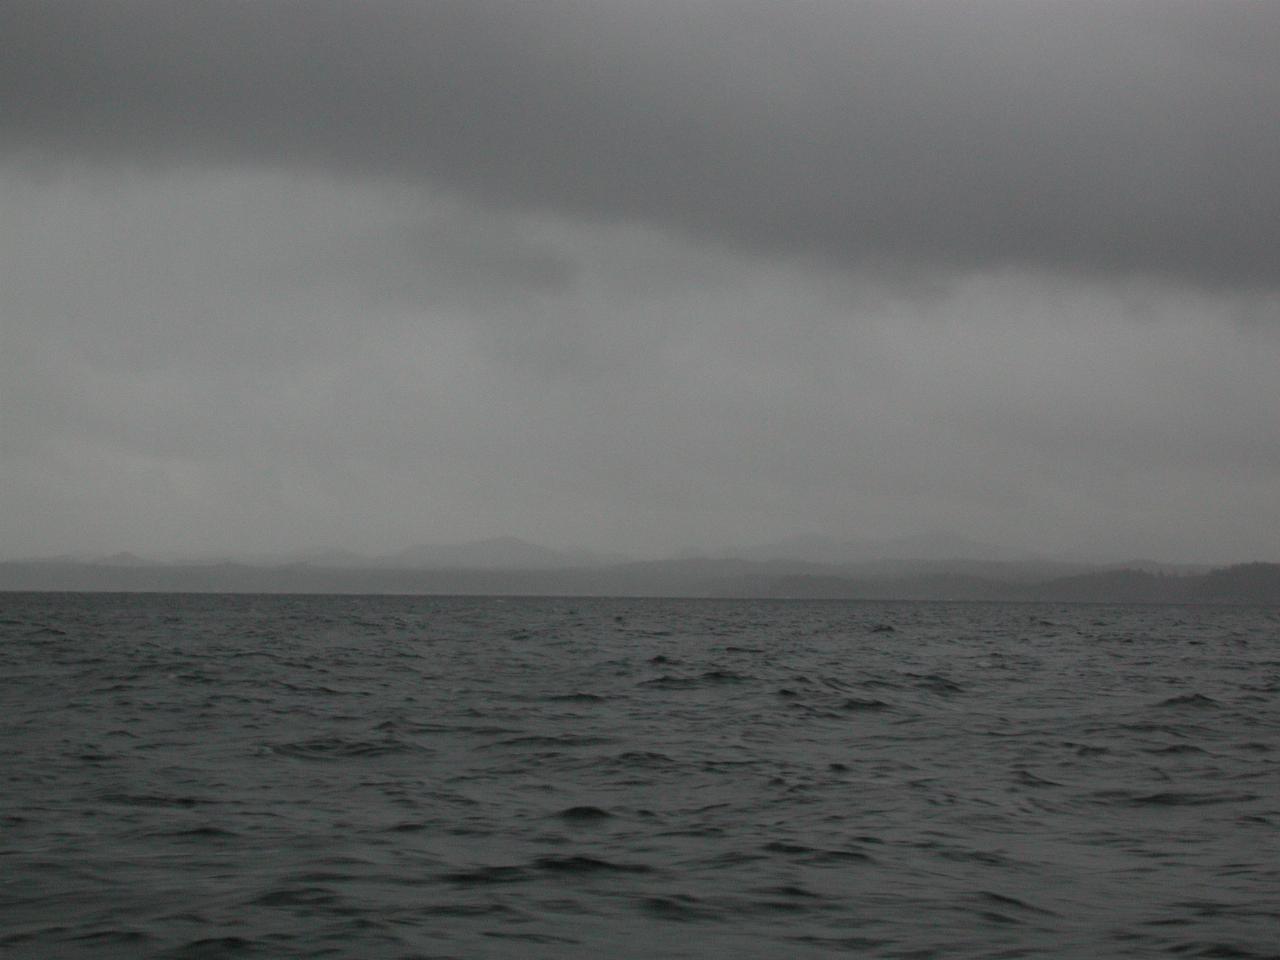 Distant mainland, shrouded in low cloud, Queen Charlotte Sound